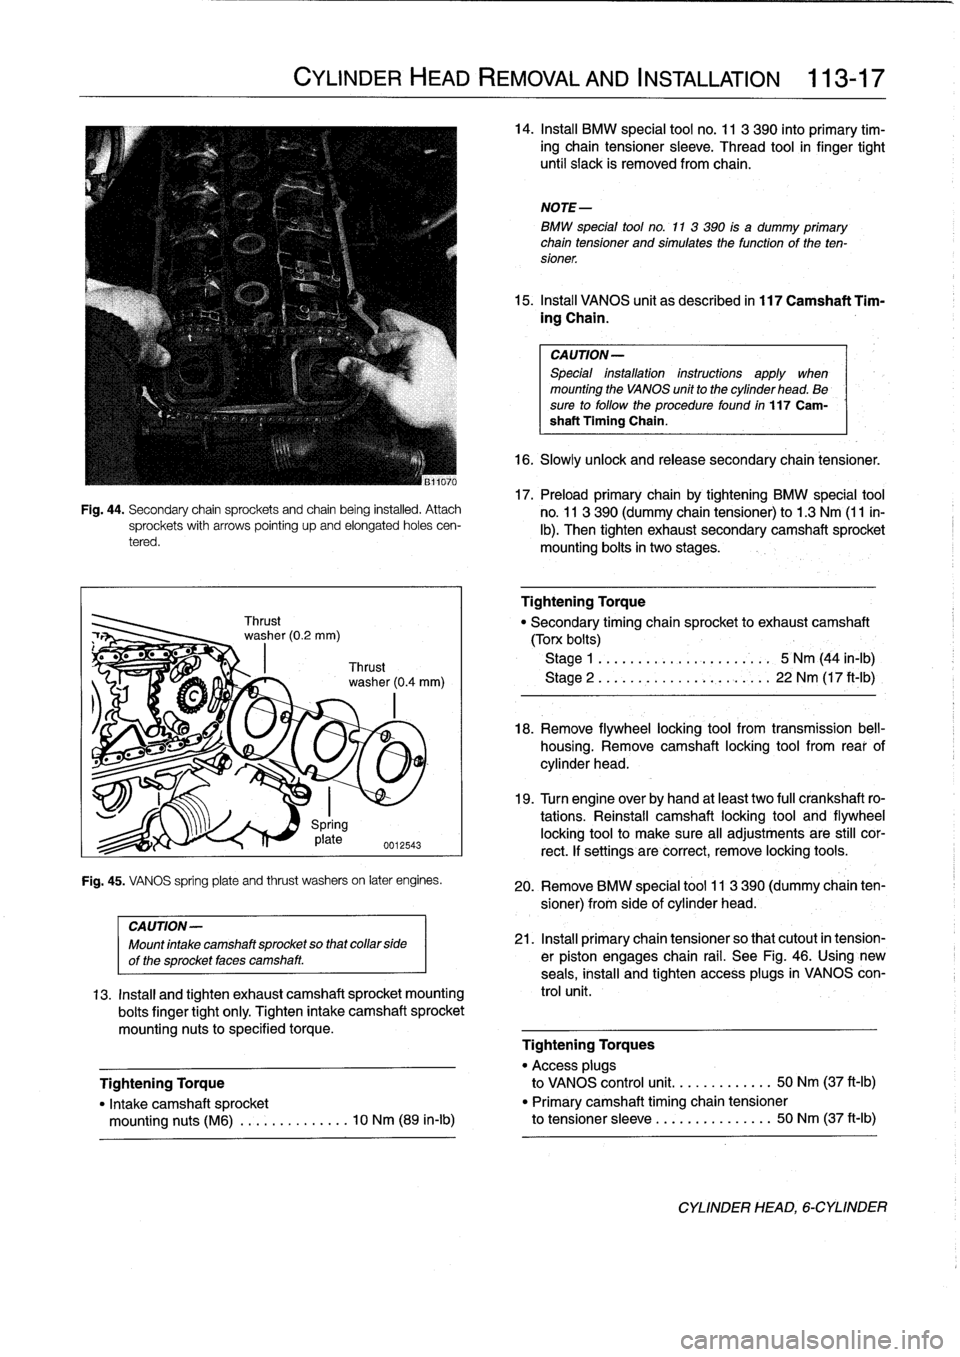 BMW M3 1996 E36 Workshop Manual 
Fig
.
44
.
Secondary
chain
sprockets
and
chain
being
installed
.
Attachsprockets
with
arrows
pointing
upand
elongated
holes
cen-
tered
.

CYLINDER
HEAD
REMOVAL
AND
INSTALLATION

	

113-17

Spring
17
